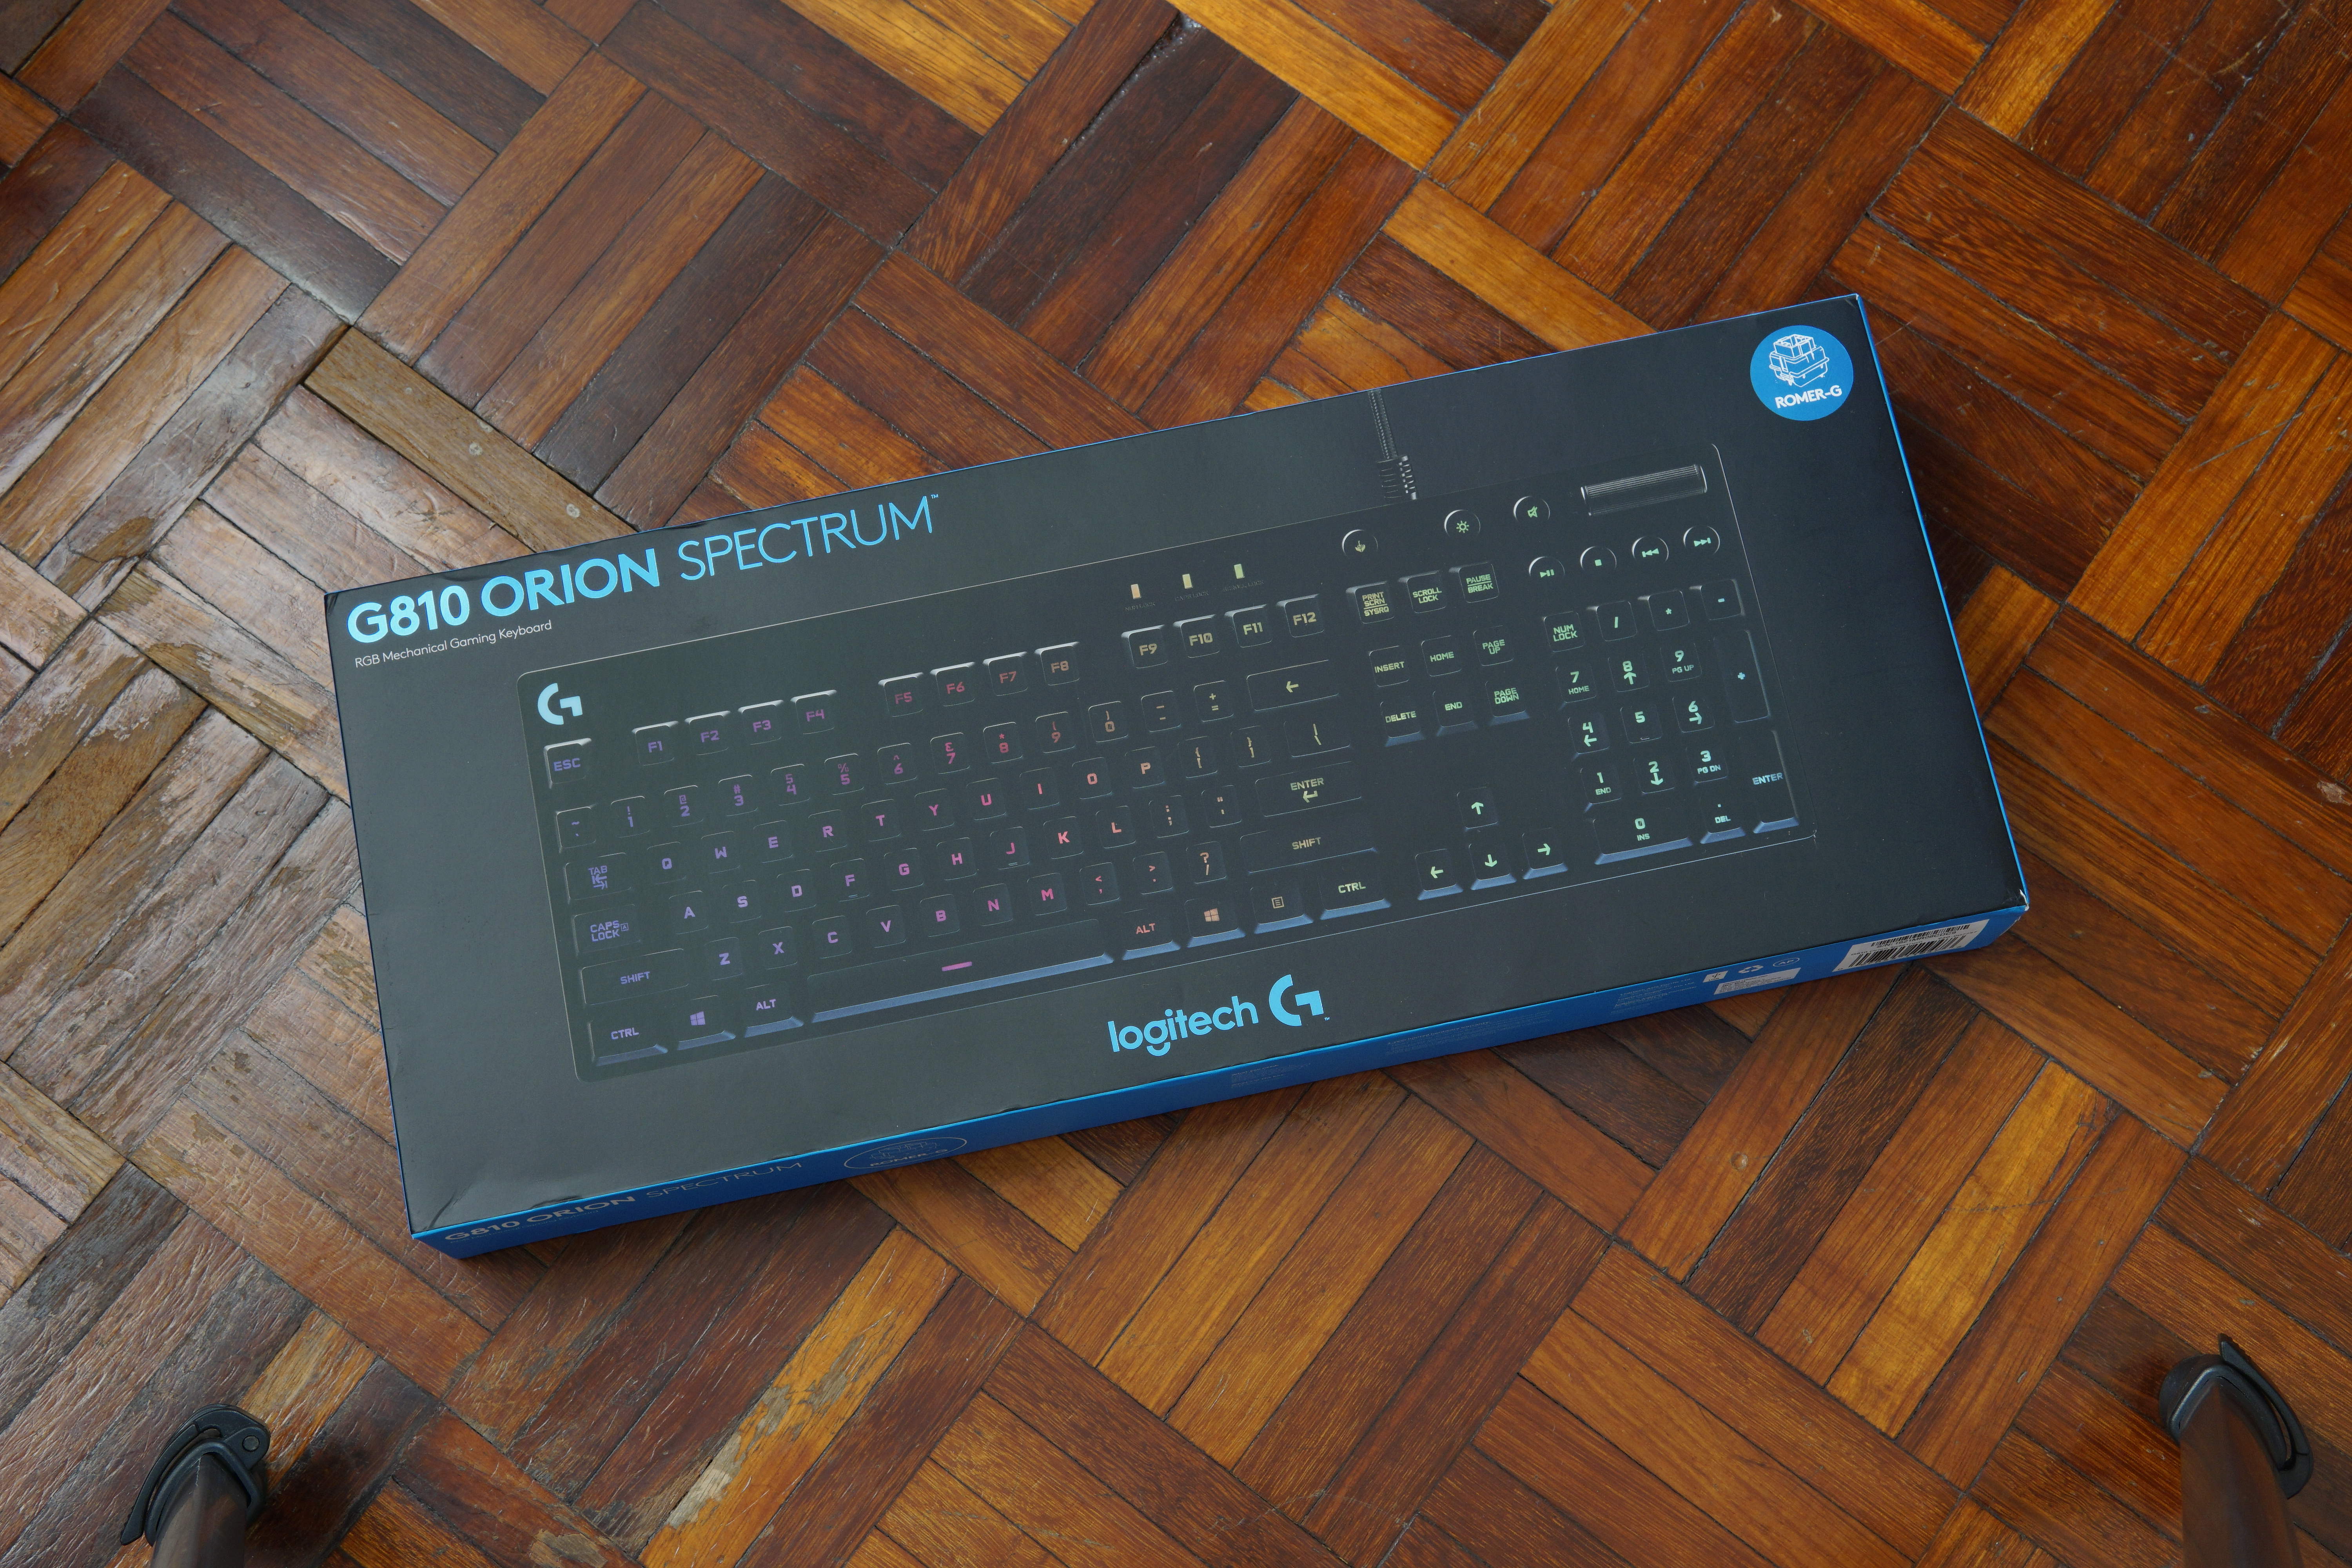 G810 Orion Spectrum review - Wonderful, only if you like the switches - Reviews - Linus Tech Tips